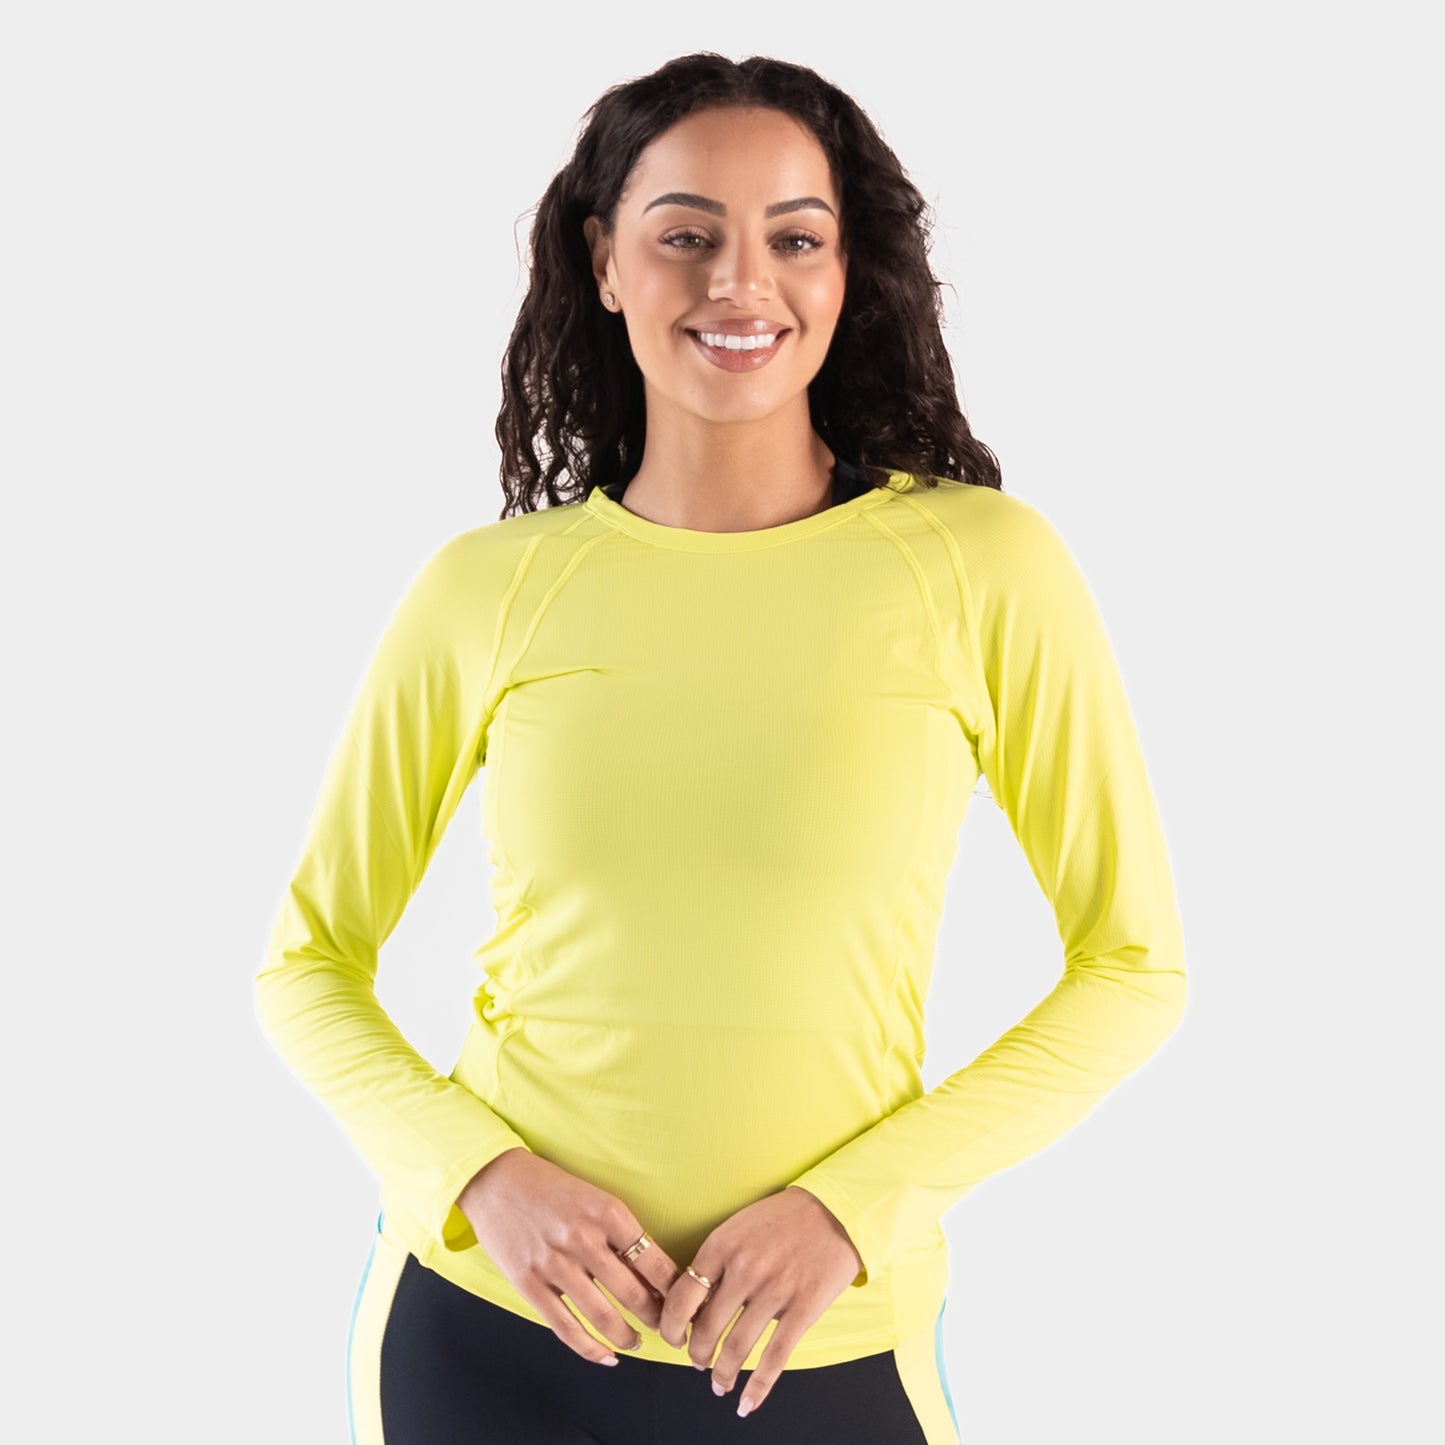 Ambition Long Sleeve - Highlighter Yellow - FINAL SALE